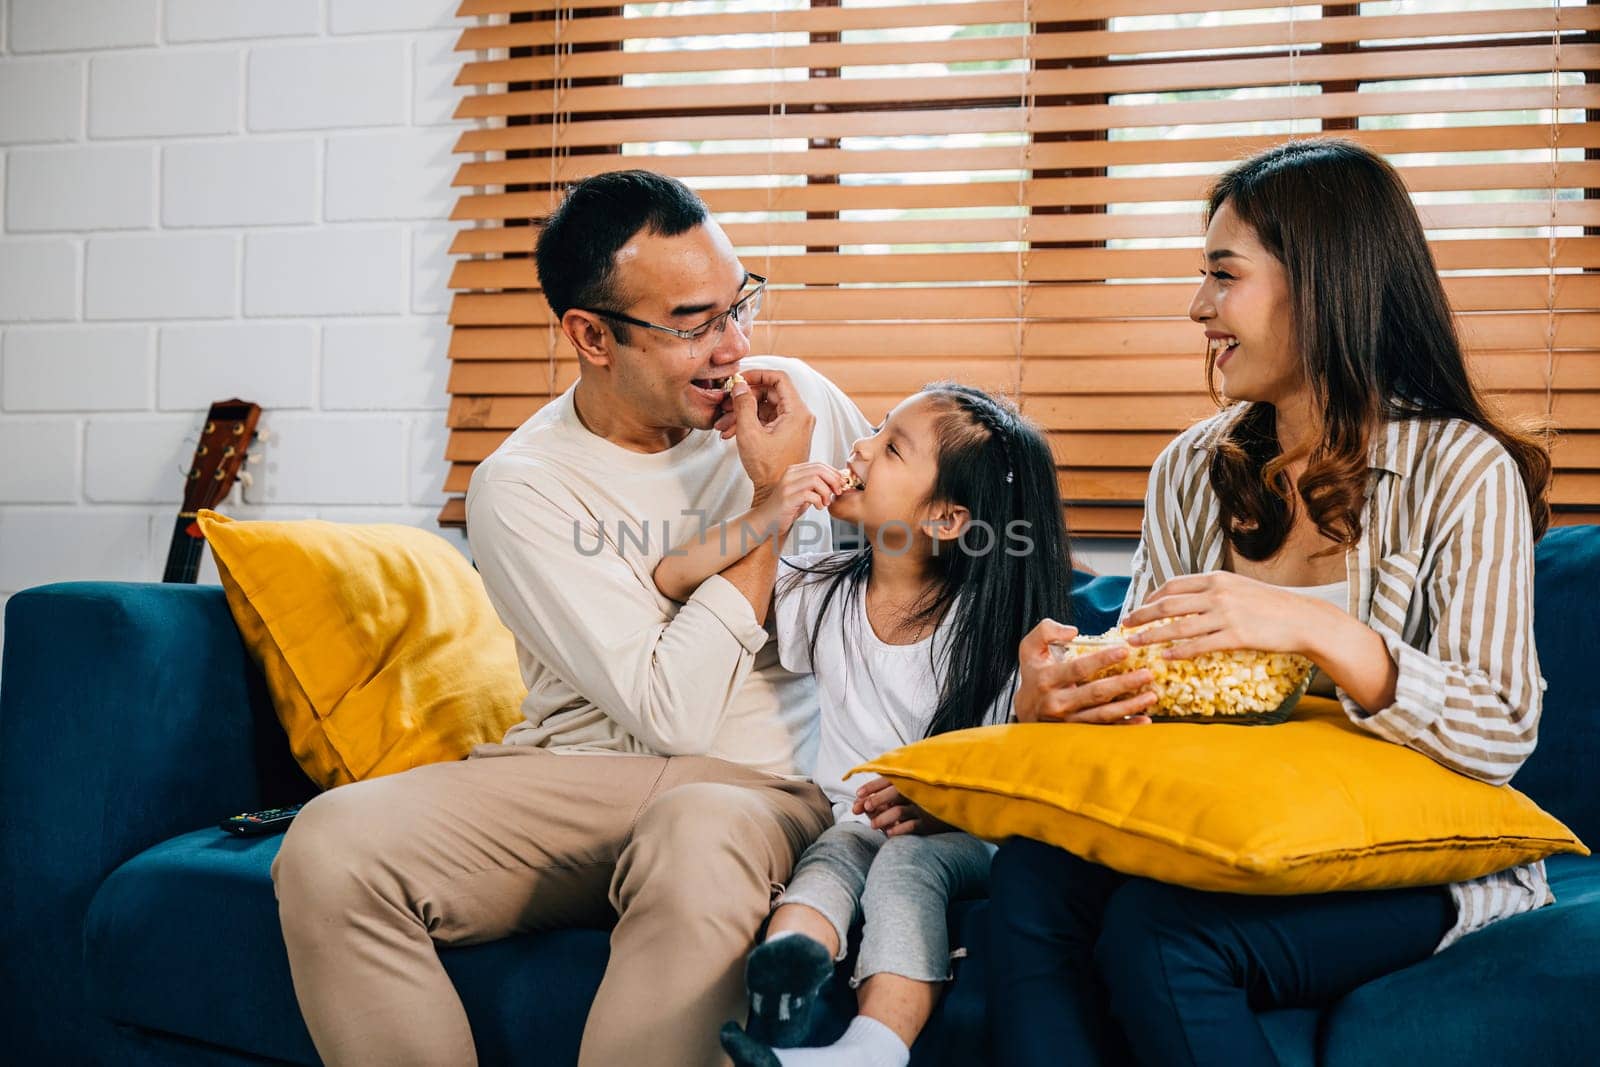 A smiling family with popcorn gathers in living room watching TV together. They are enjoying candid moments of togetherness bonding and relaxation during their quality time at home.